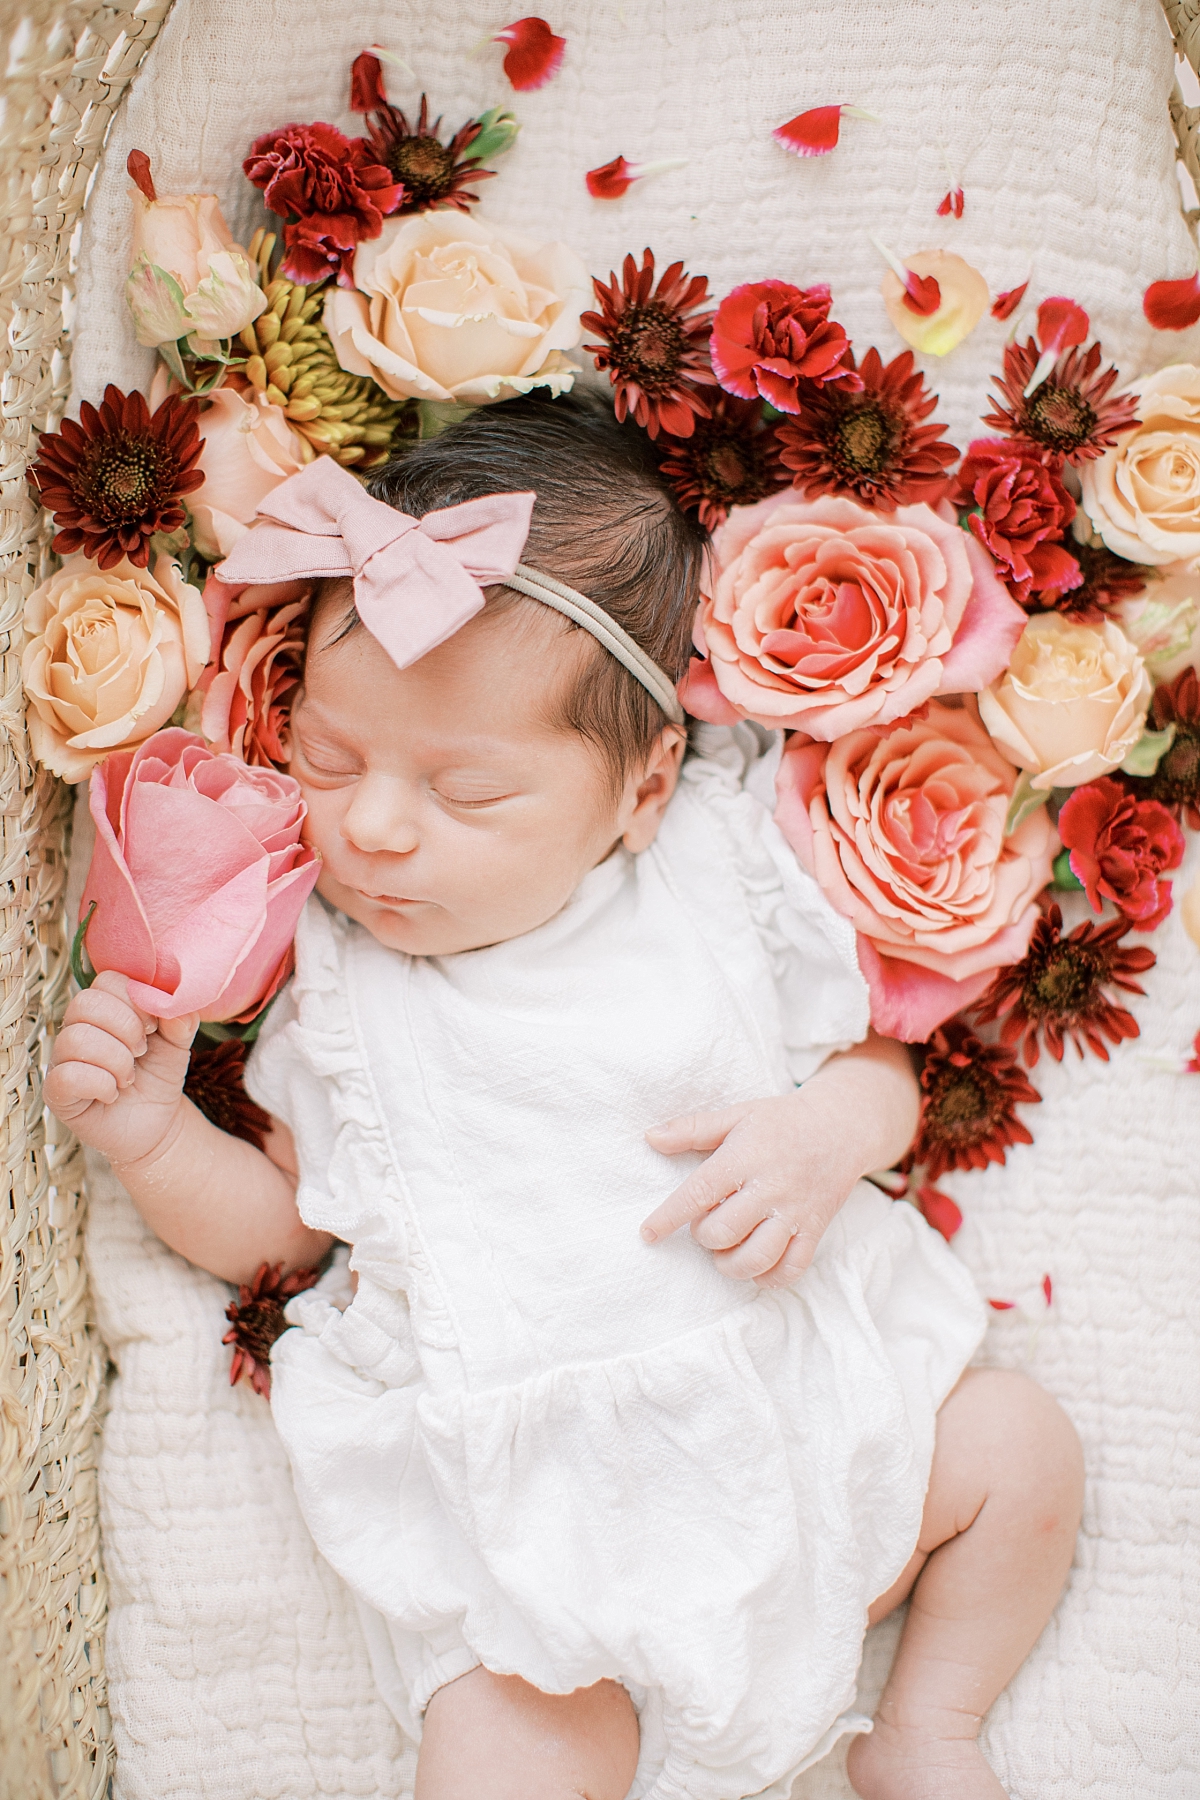 Lancaster, PA newborn photography session in studio with flowers